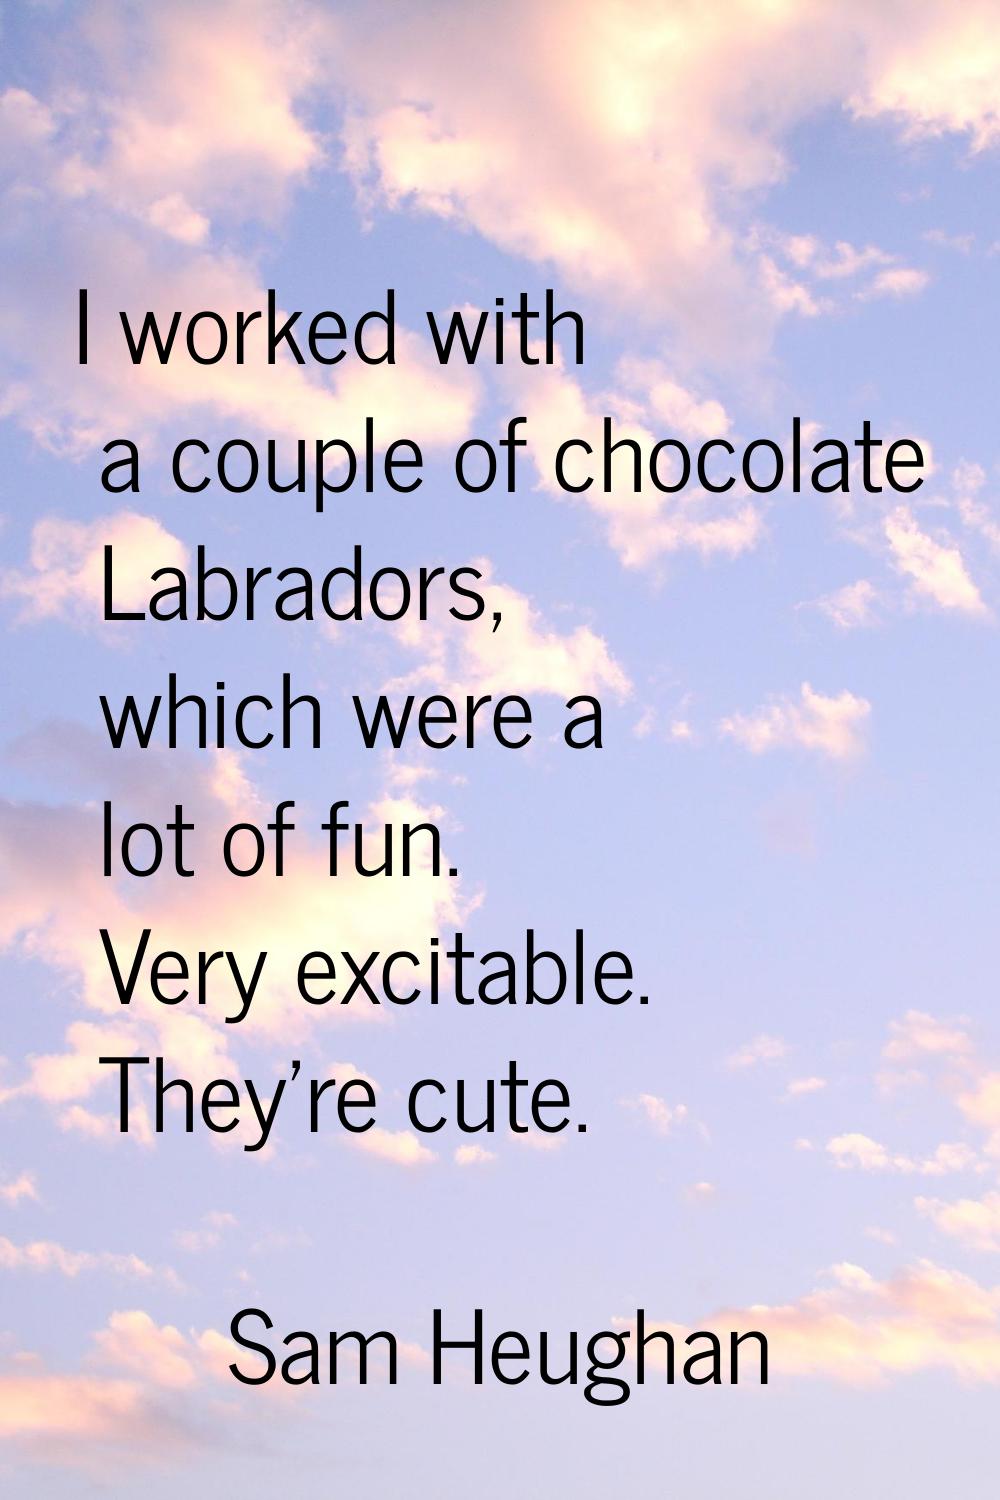 I worked with a couple of chocolate Labradors, which were a lot of fun. Very excitable. They're cut